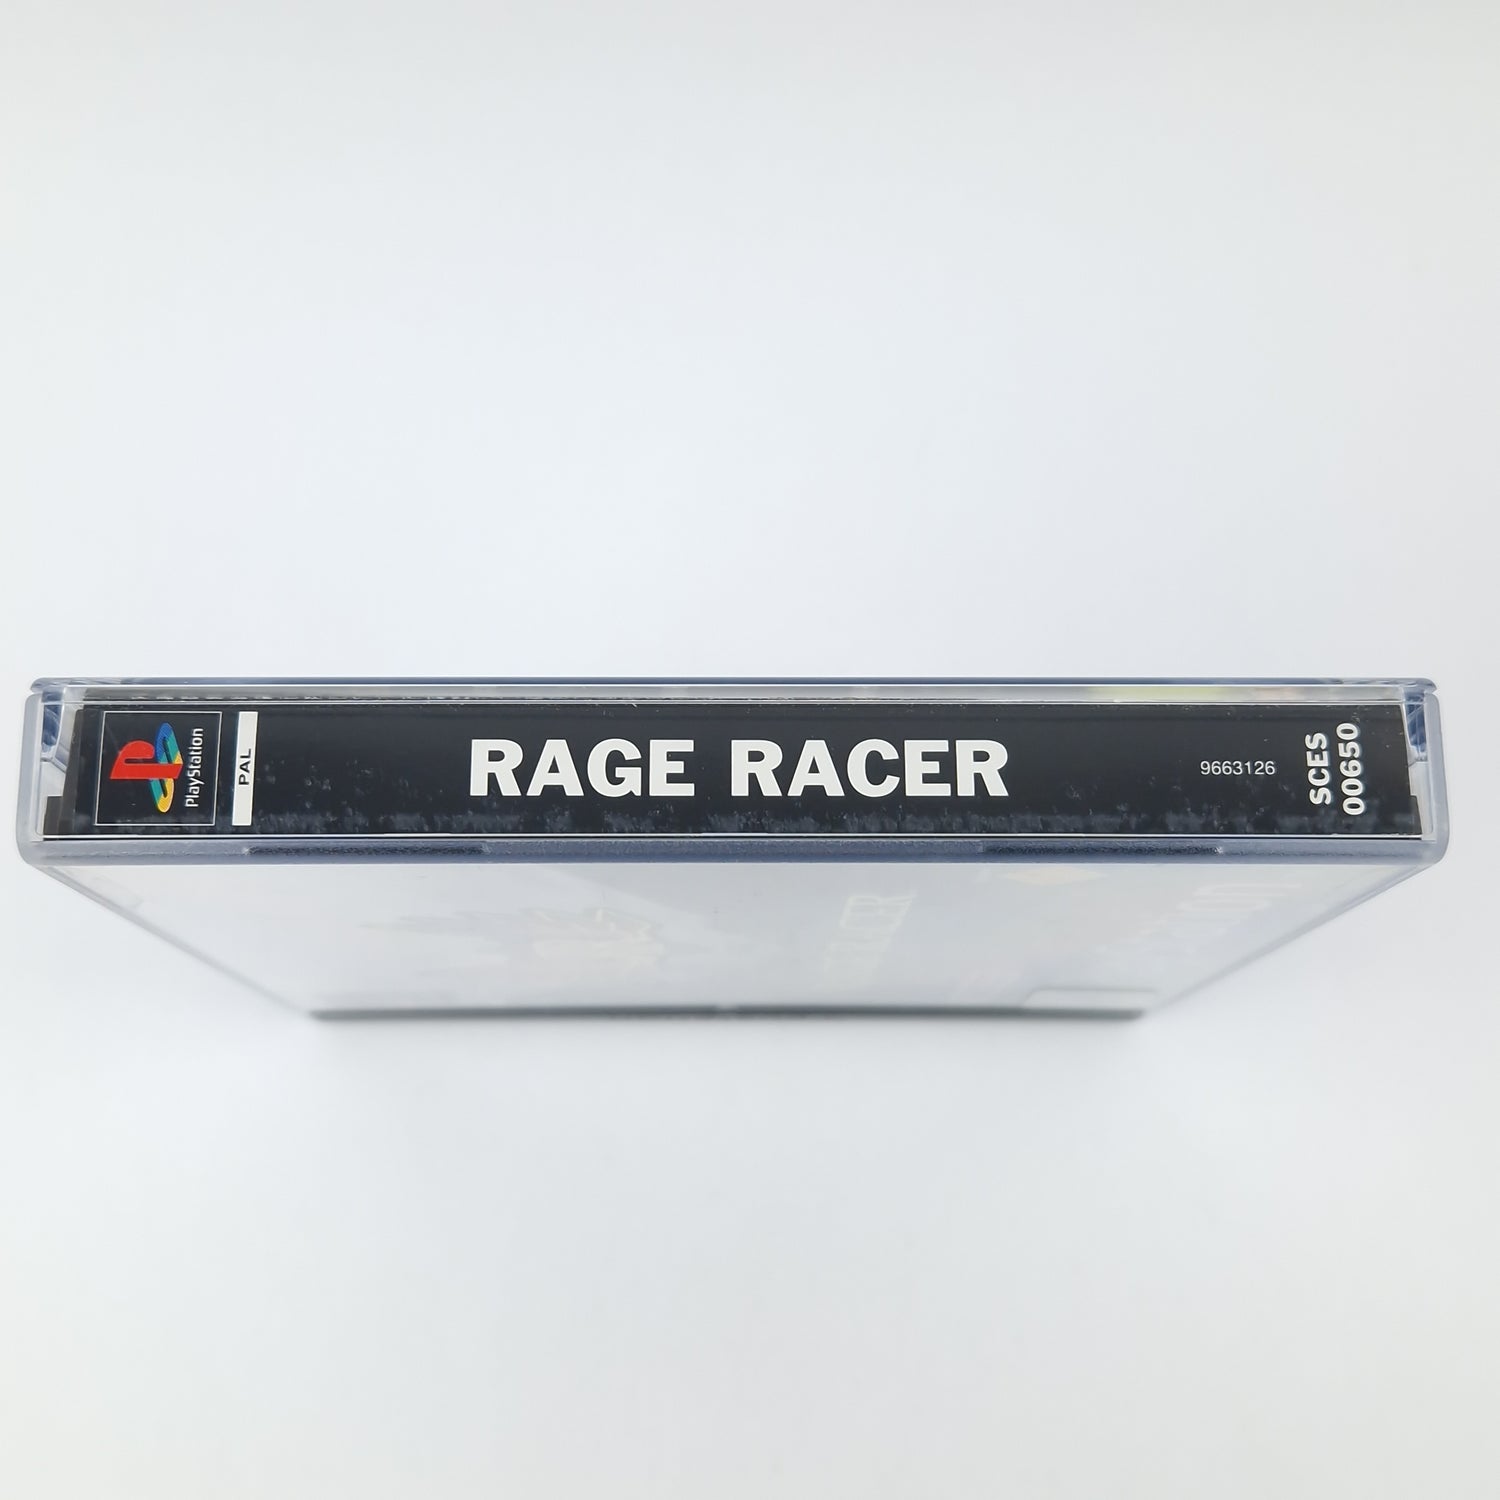 Playstation 1 Spiel : Rage Racer - CD Anleitung OVP SONY PS1 PSX PAL